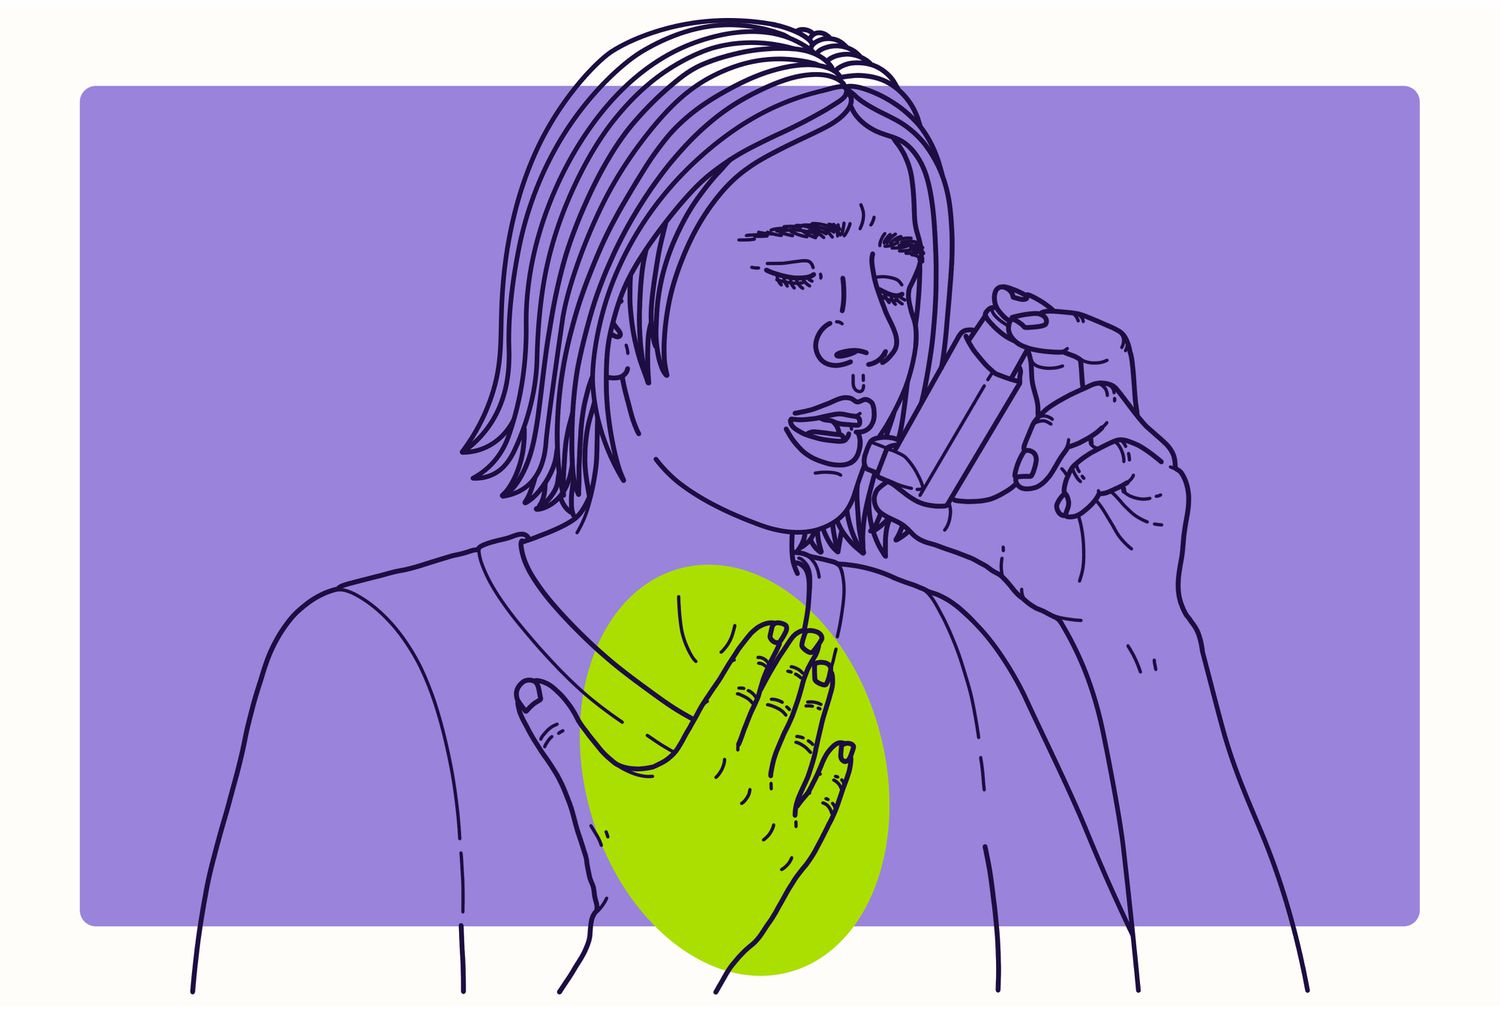 Asthma Treatment During A Long Period of Time